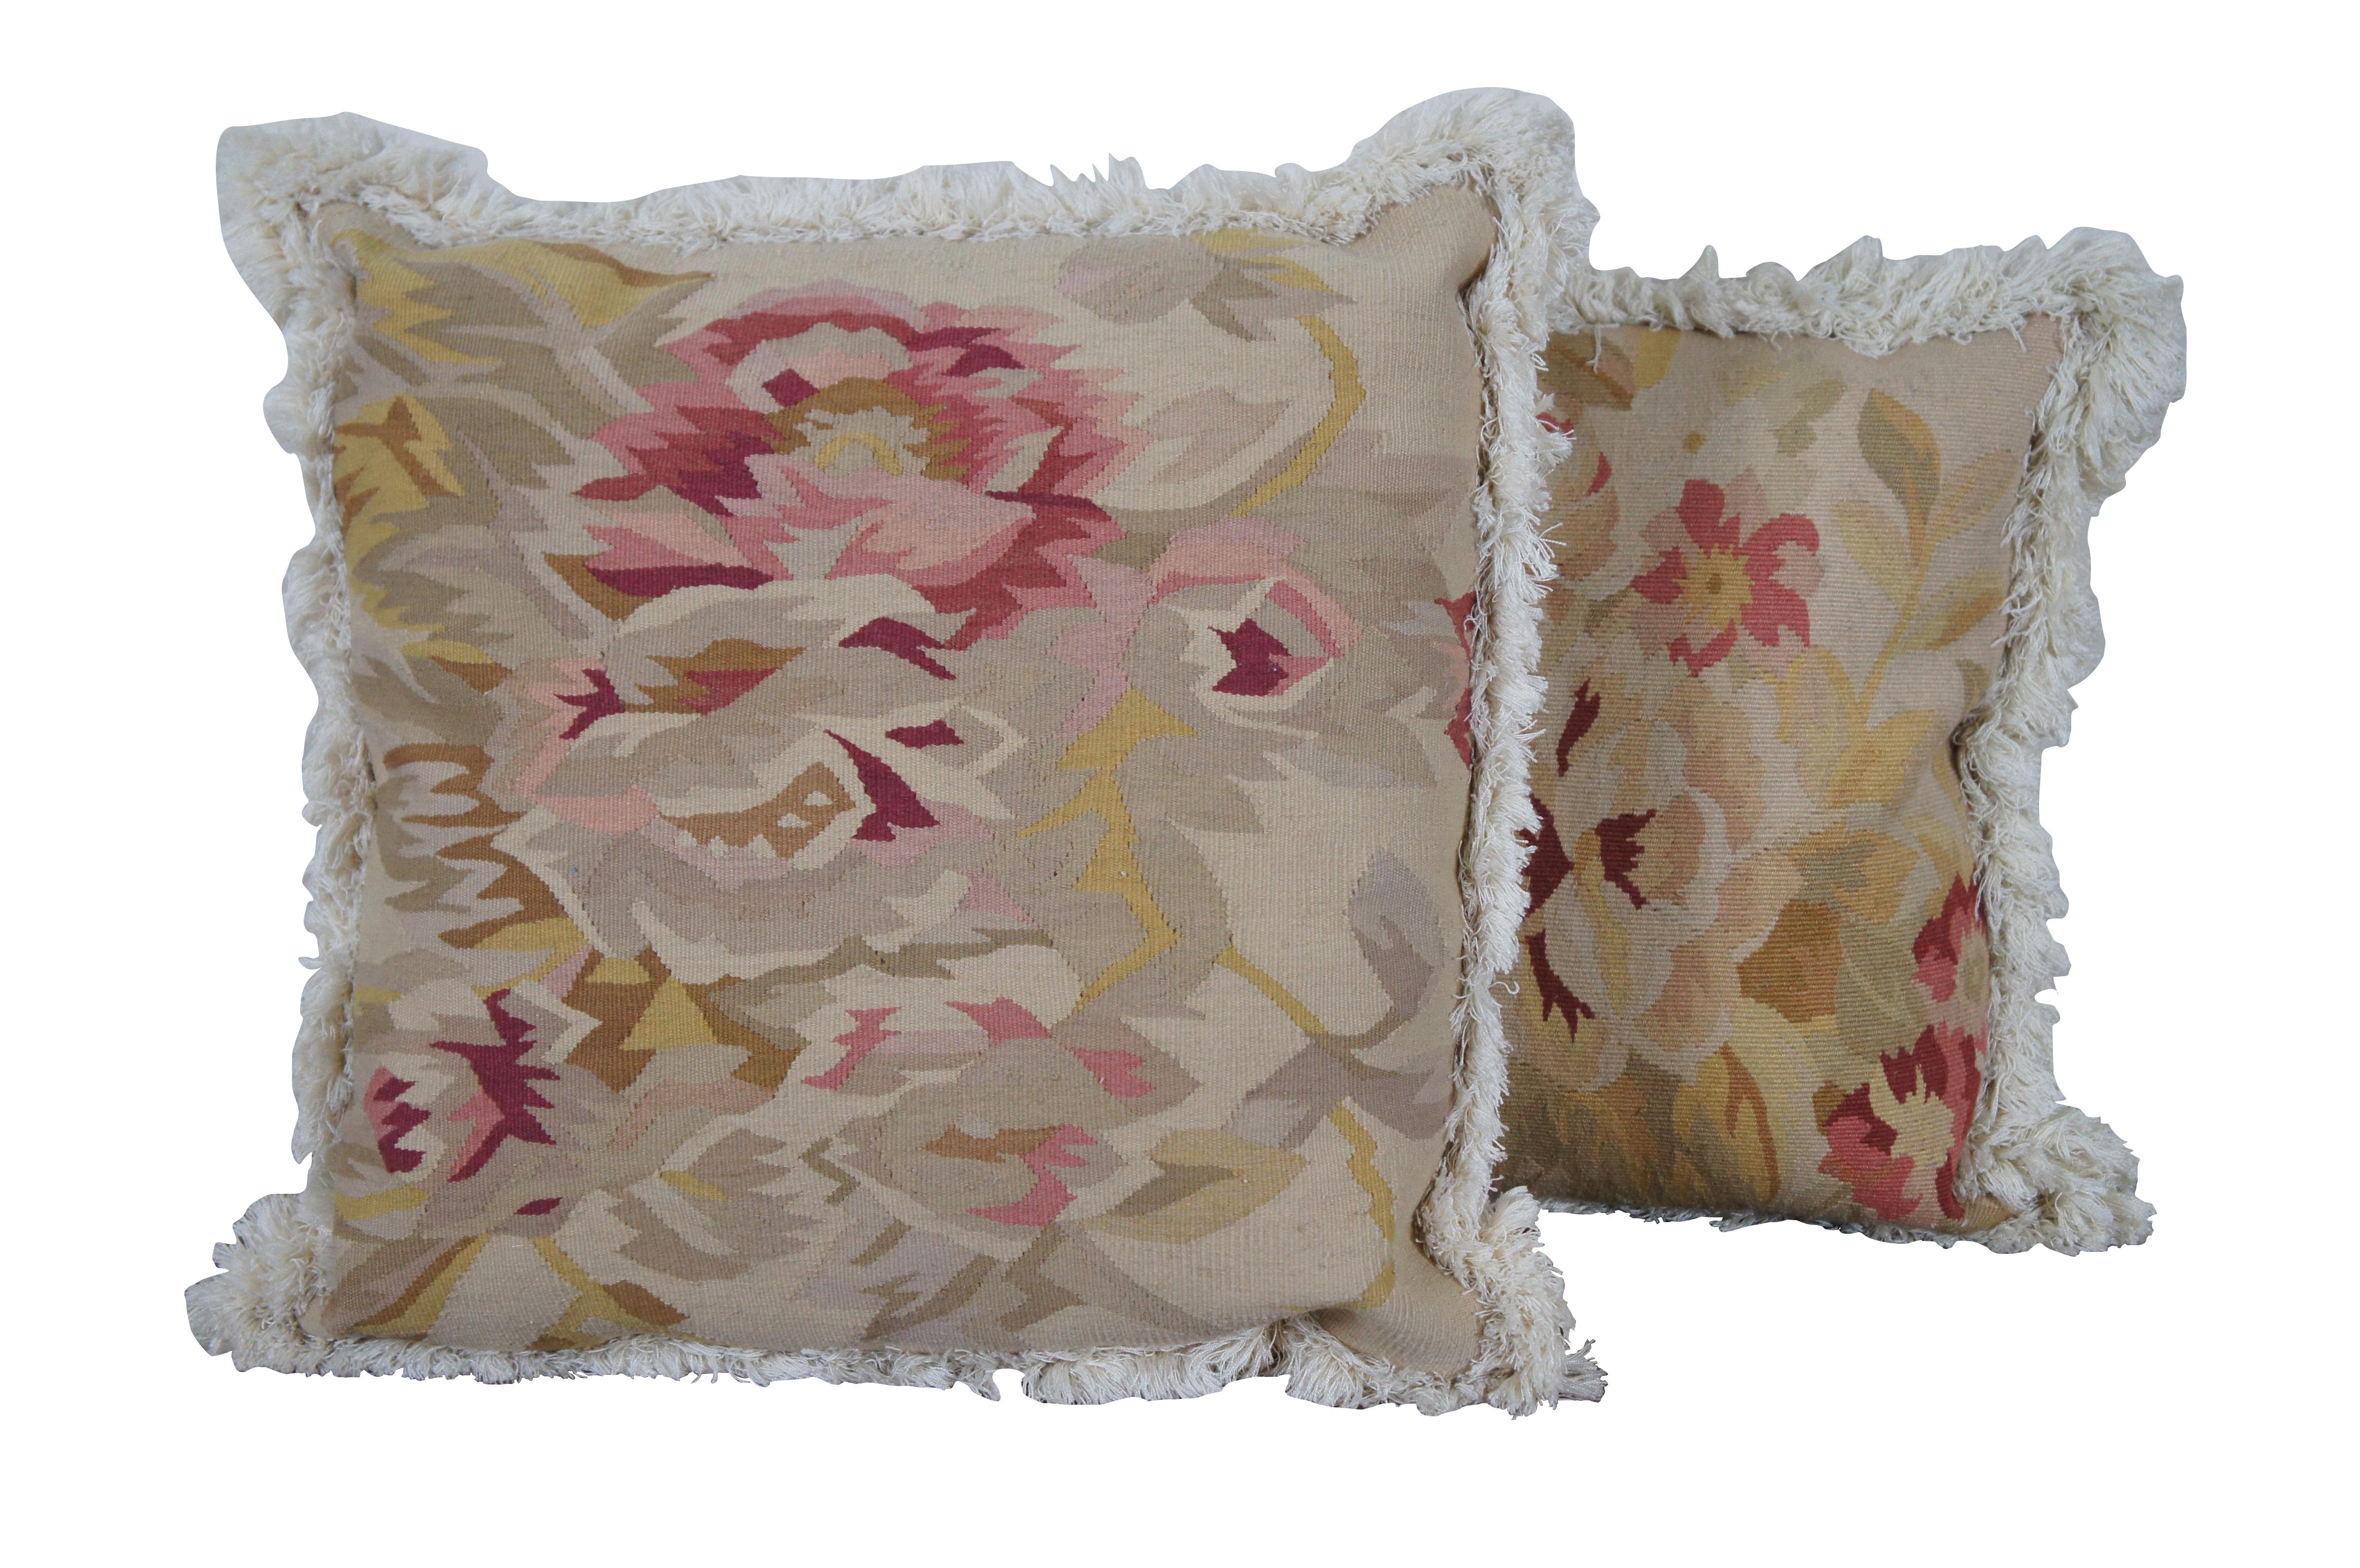 Pair of French Aubusson style throw pillows featuring beige and pink roses on the front with beige / cream velour backs and cream fringe; zipper closure, polyester fiber filled.